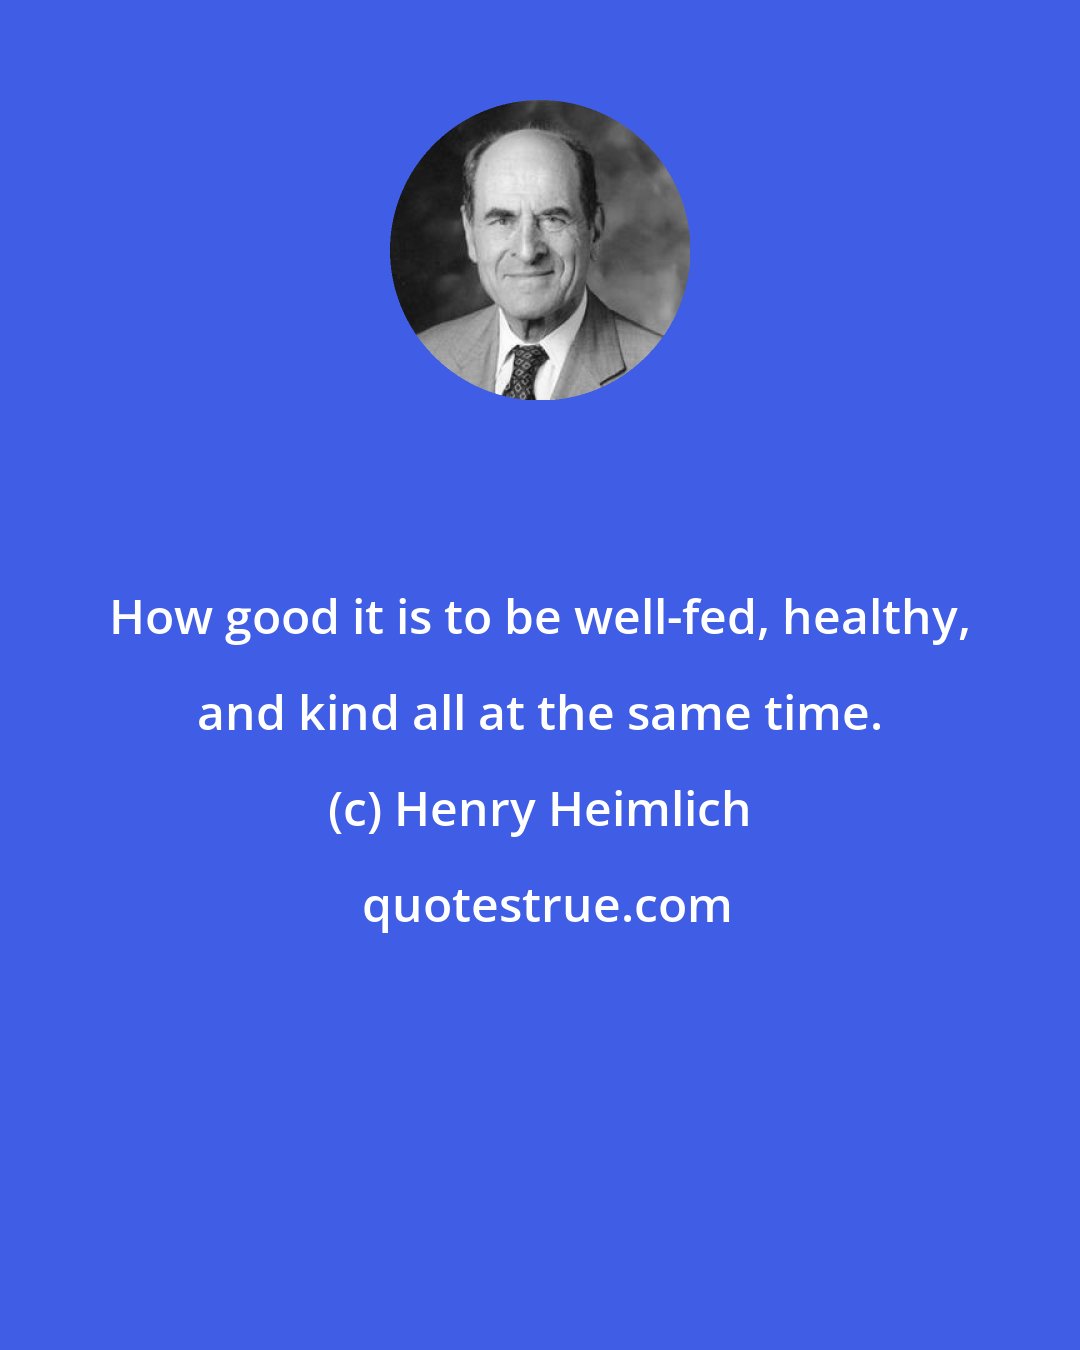 Henry Heimlich: How good it is to be well-fed, healthy, and kind all at the same time.